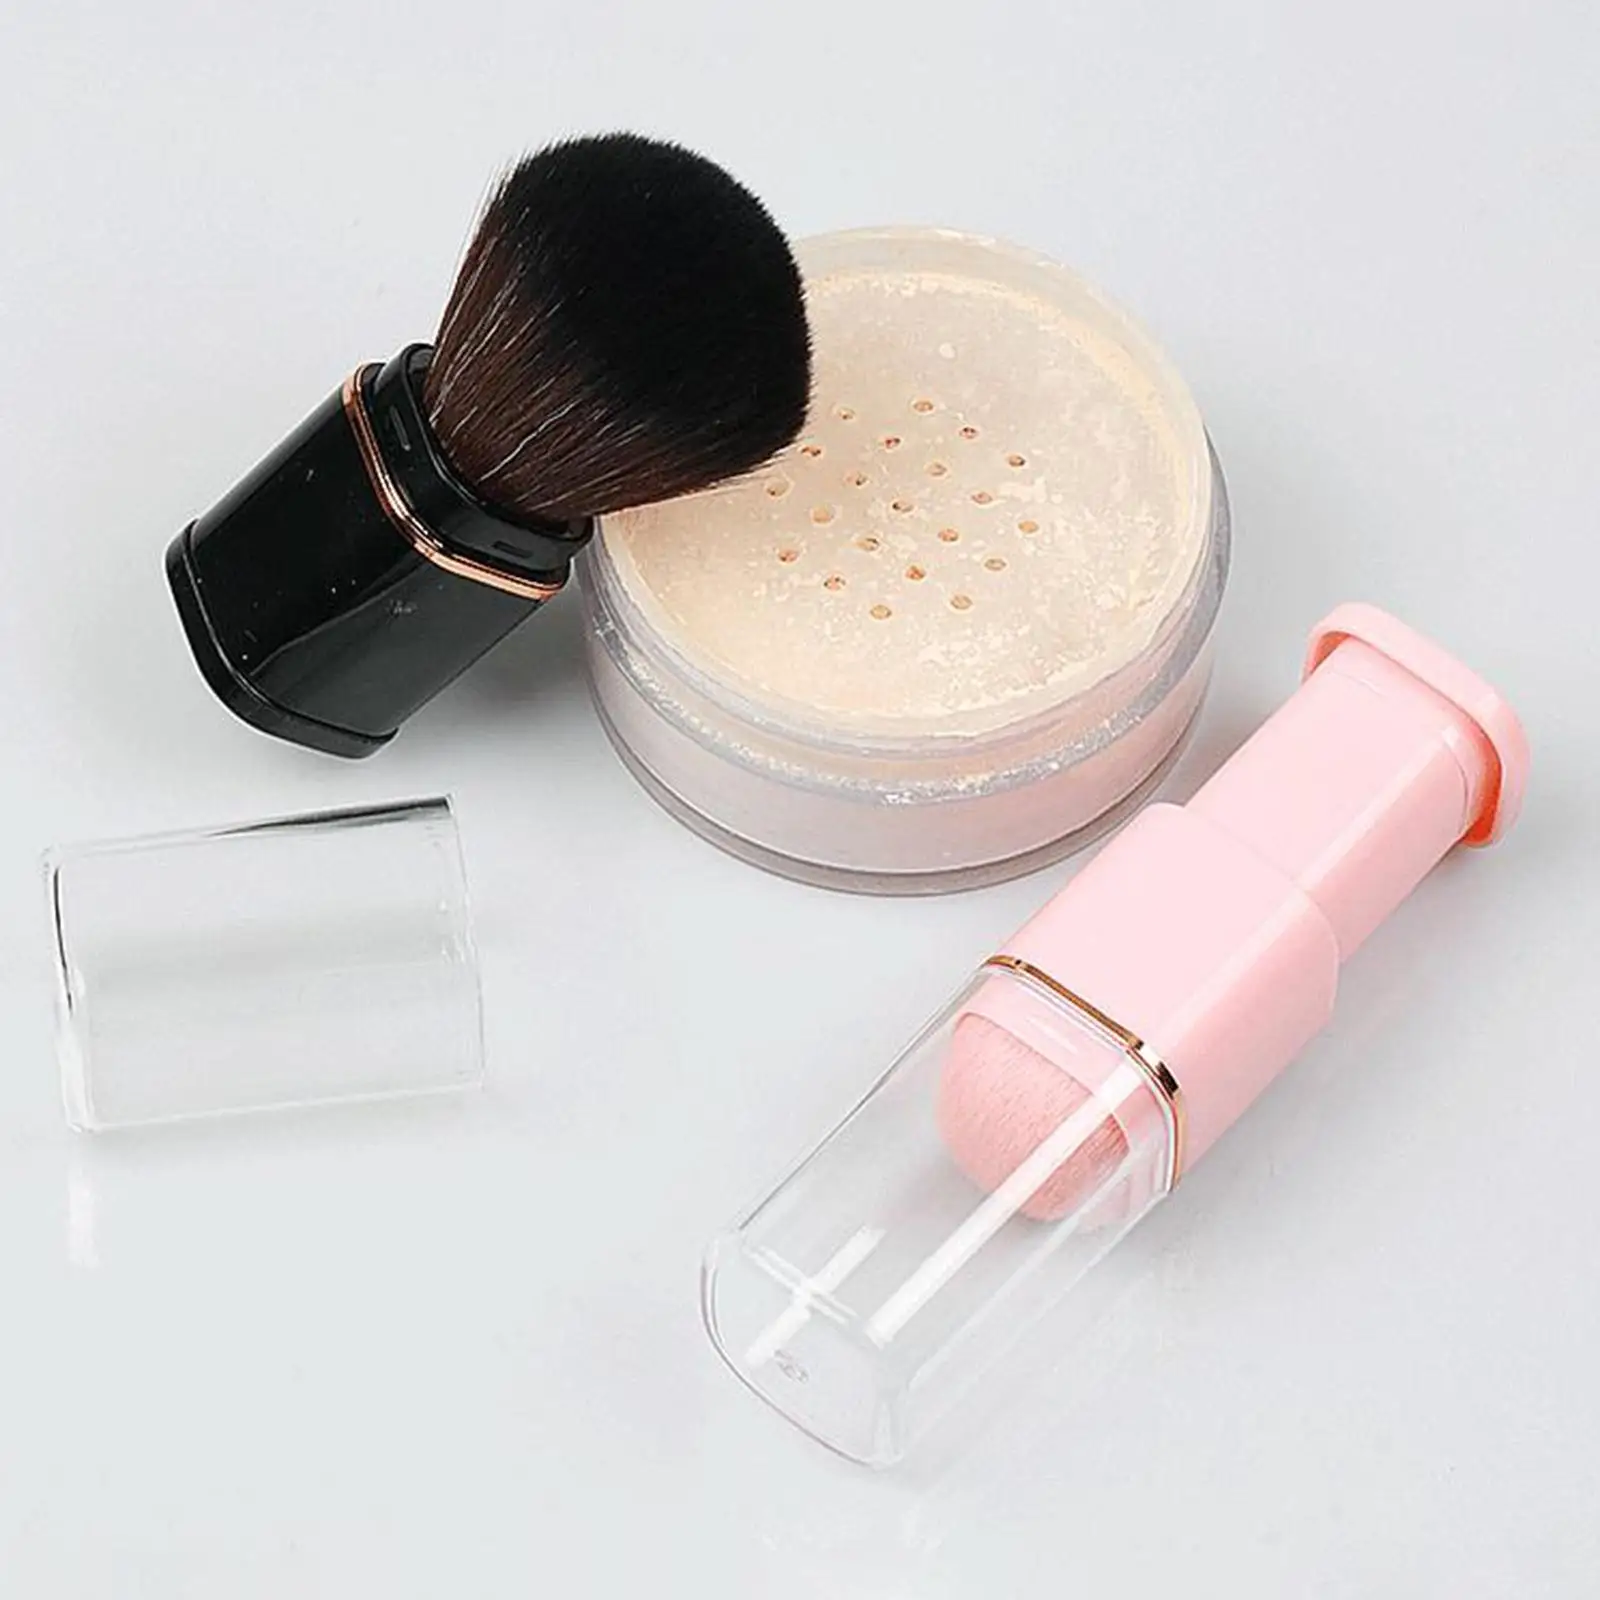 Portable Retractable Makeup Brush Travel with Cover Small Face Blush Brush for Loose Powder Highlighter Buffing